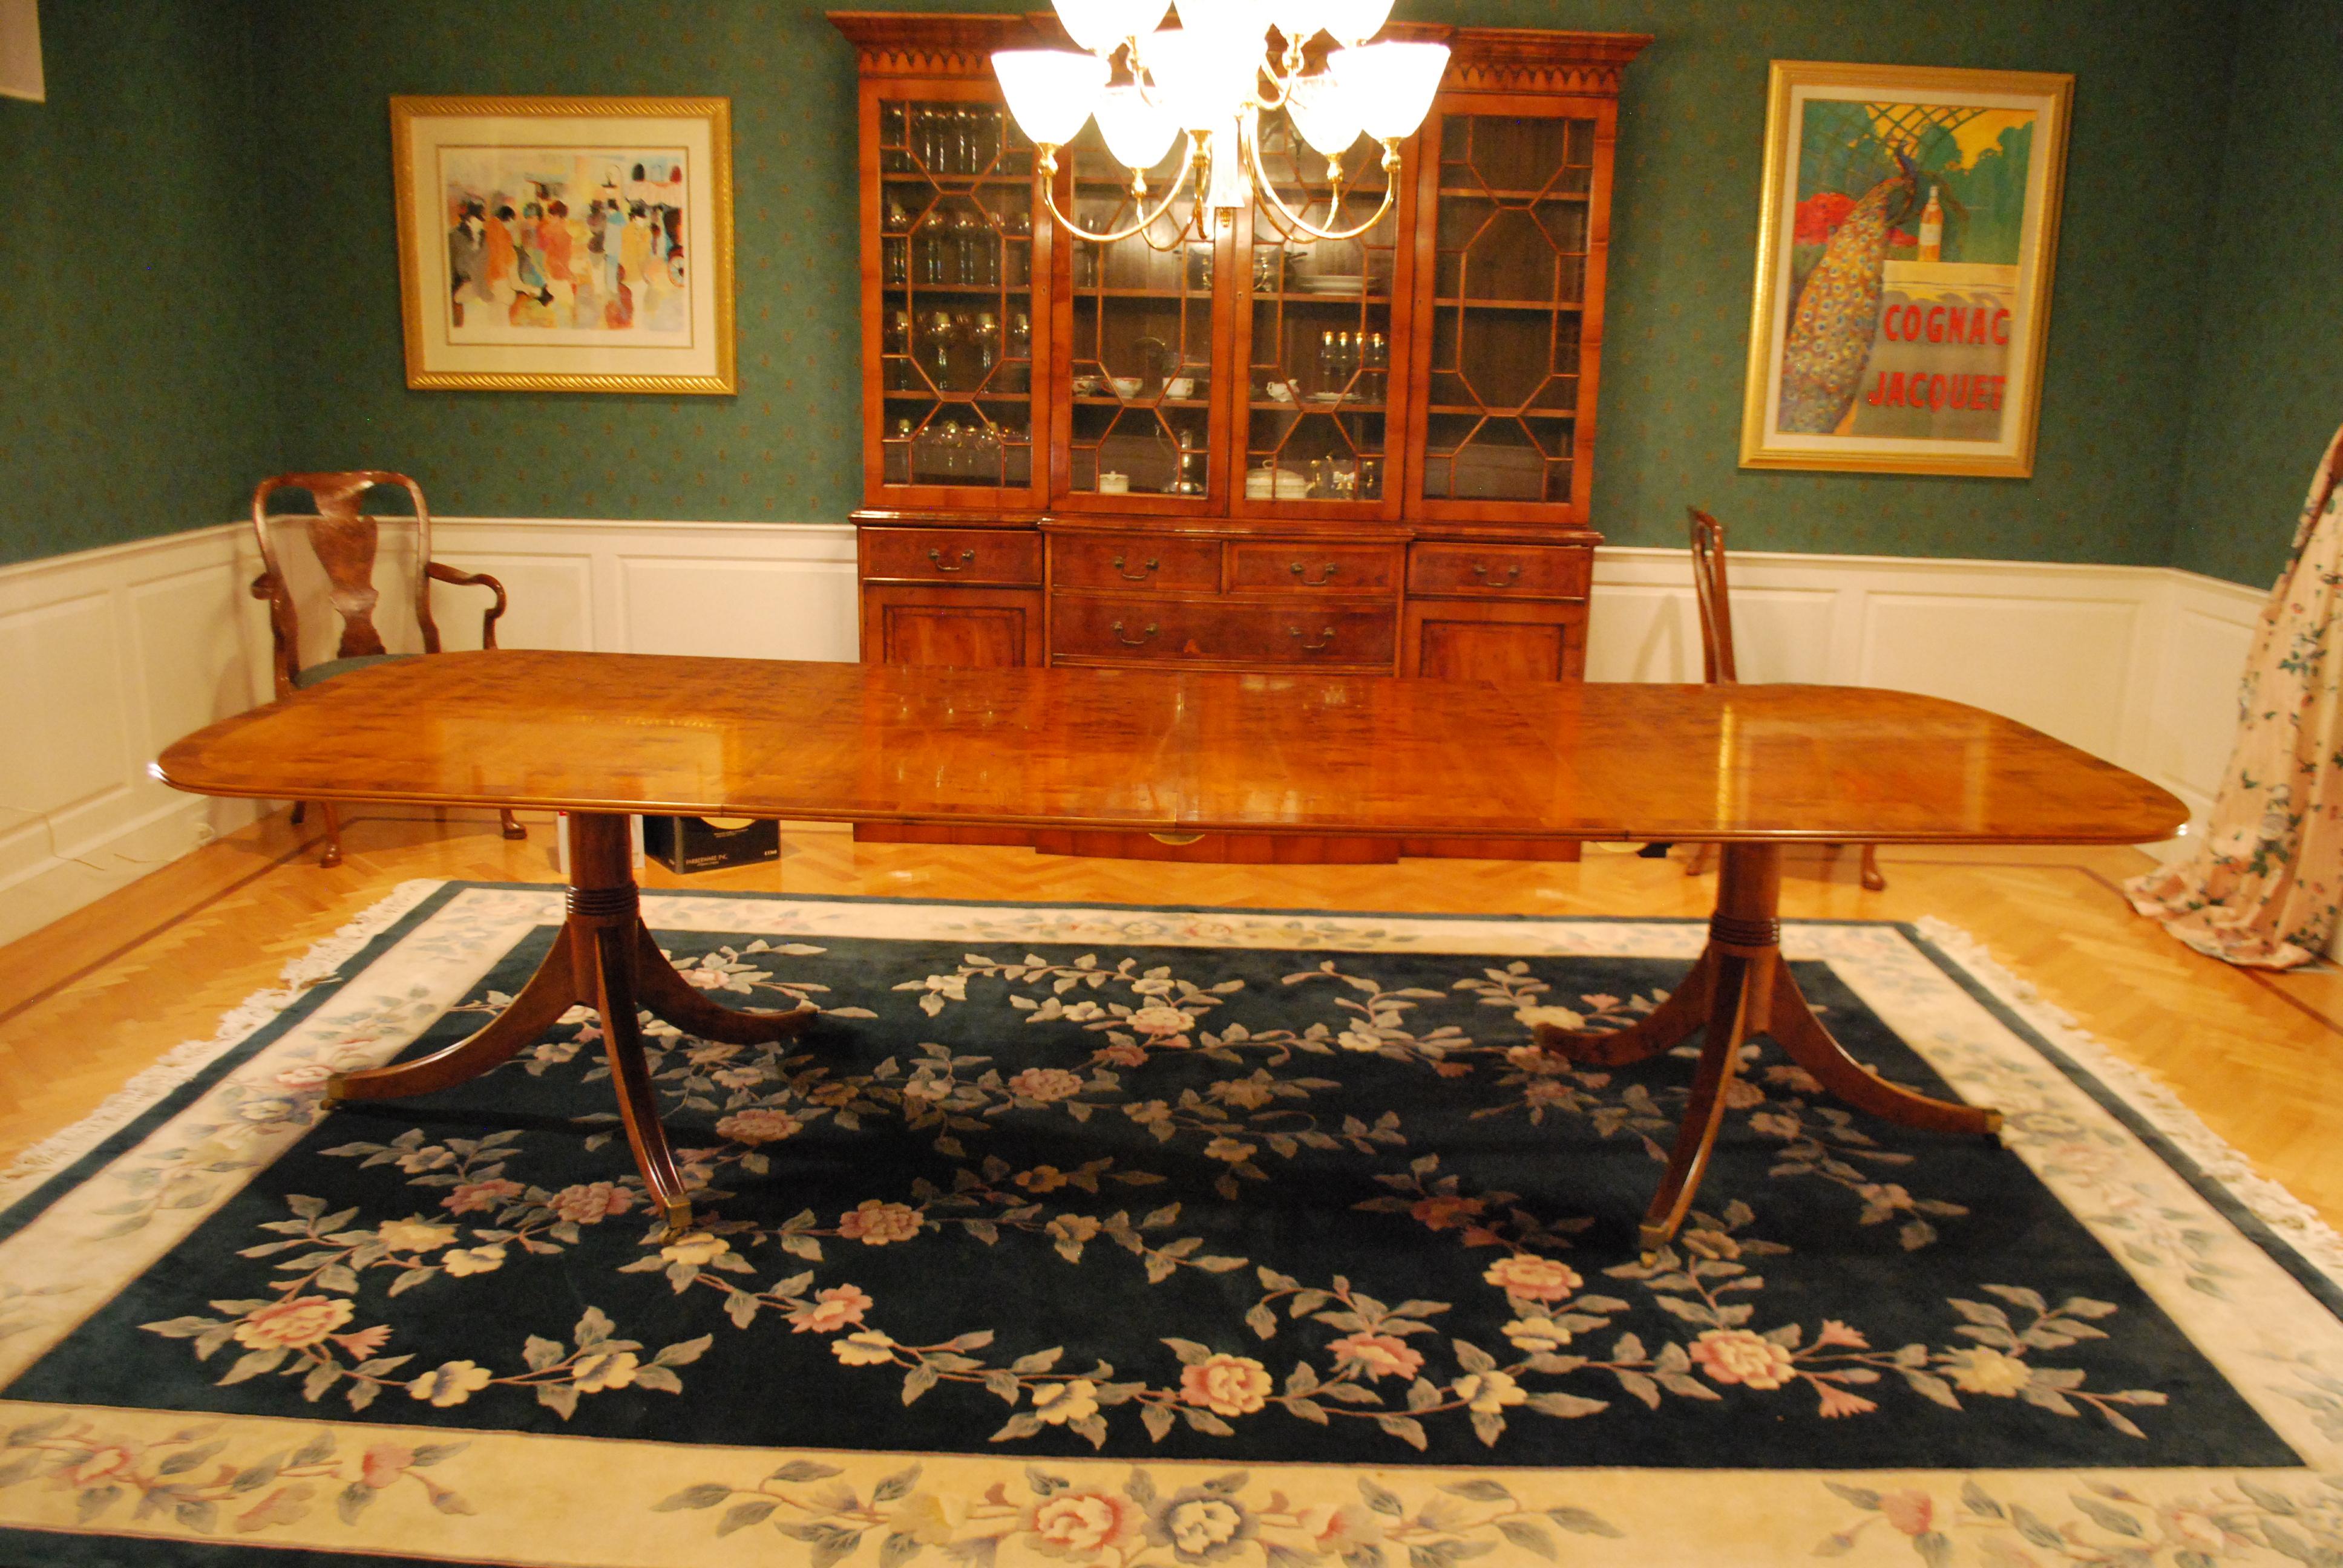 George III style pedestal table, made in Yewood by Mill House Antiques reproductions, 1992. This is a beautiful reproduction dining table in mint condition. This is priced to sell, because of a move. Surface of the table is in excellent shape. No